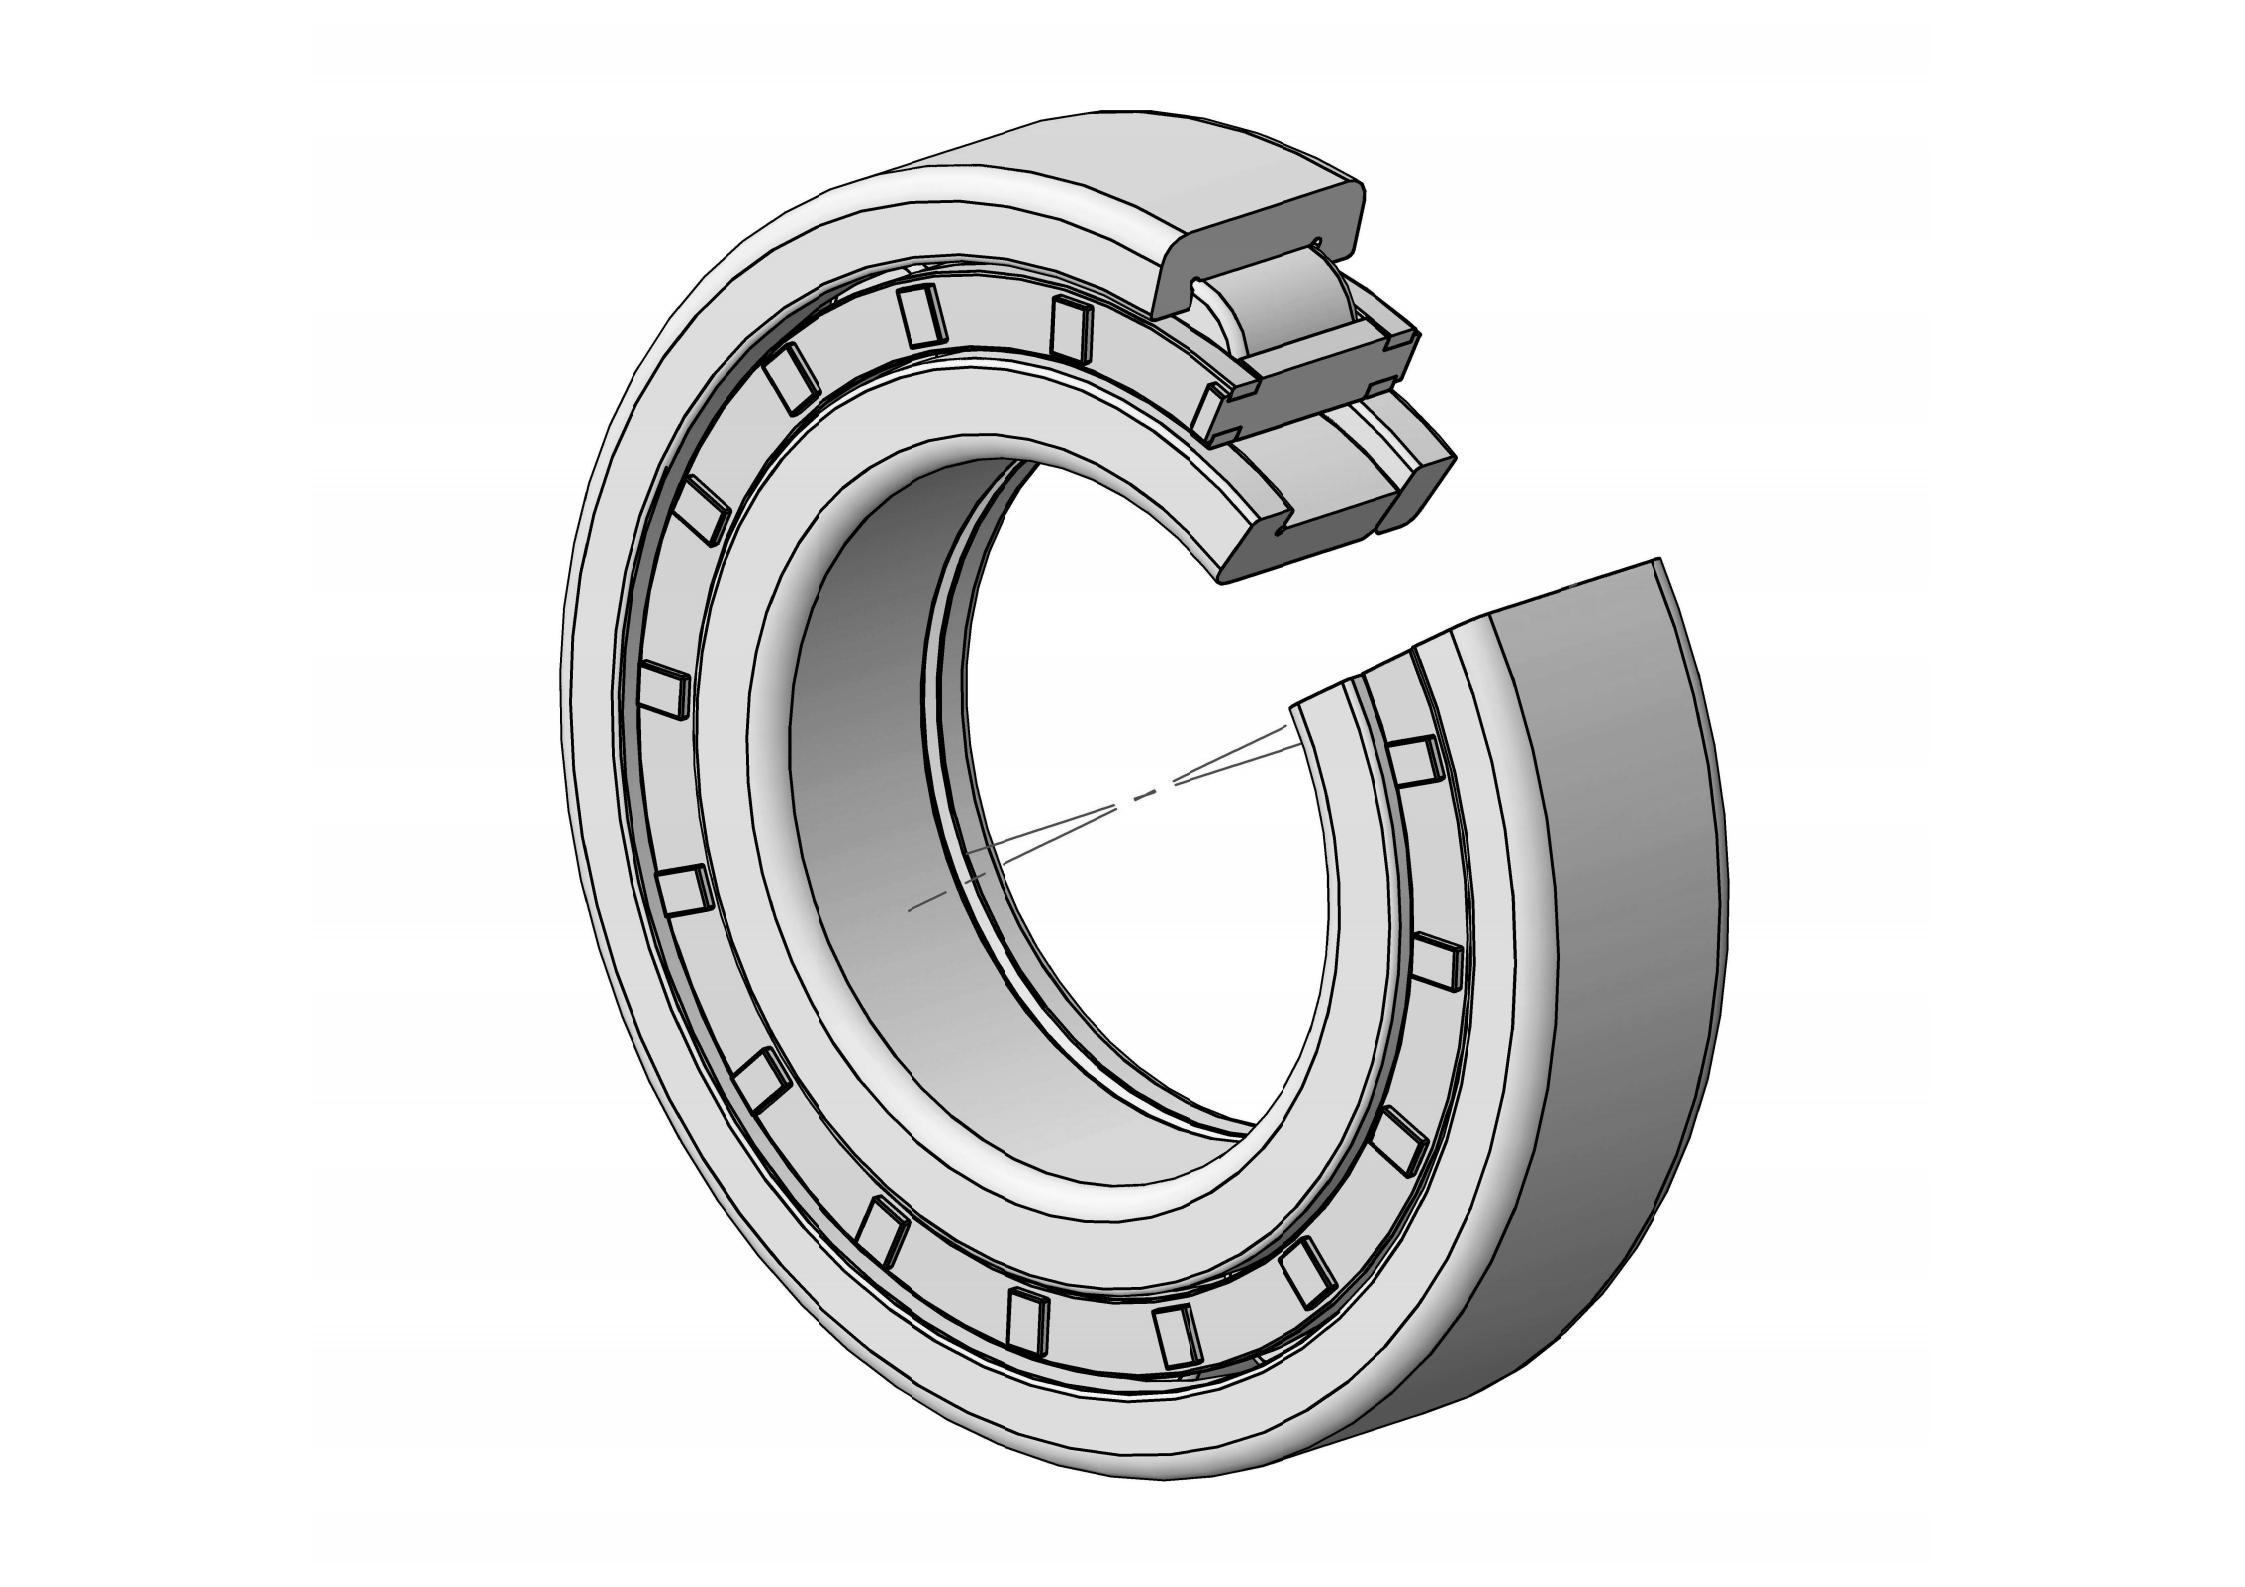 NUP2230-EM Single Row Cylindrical roller bearing 